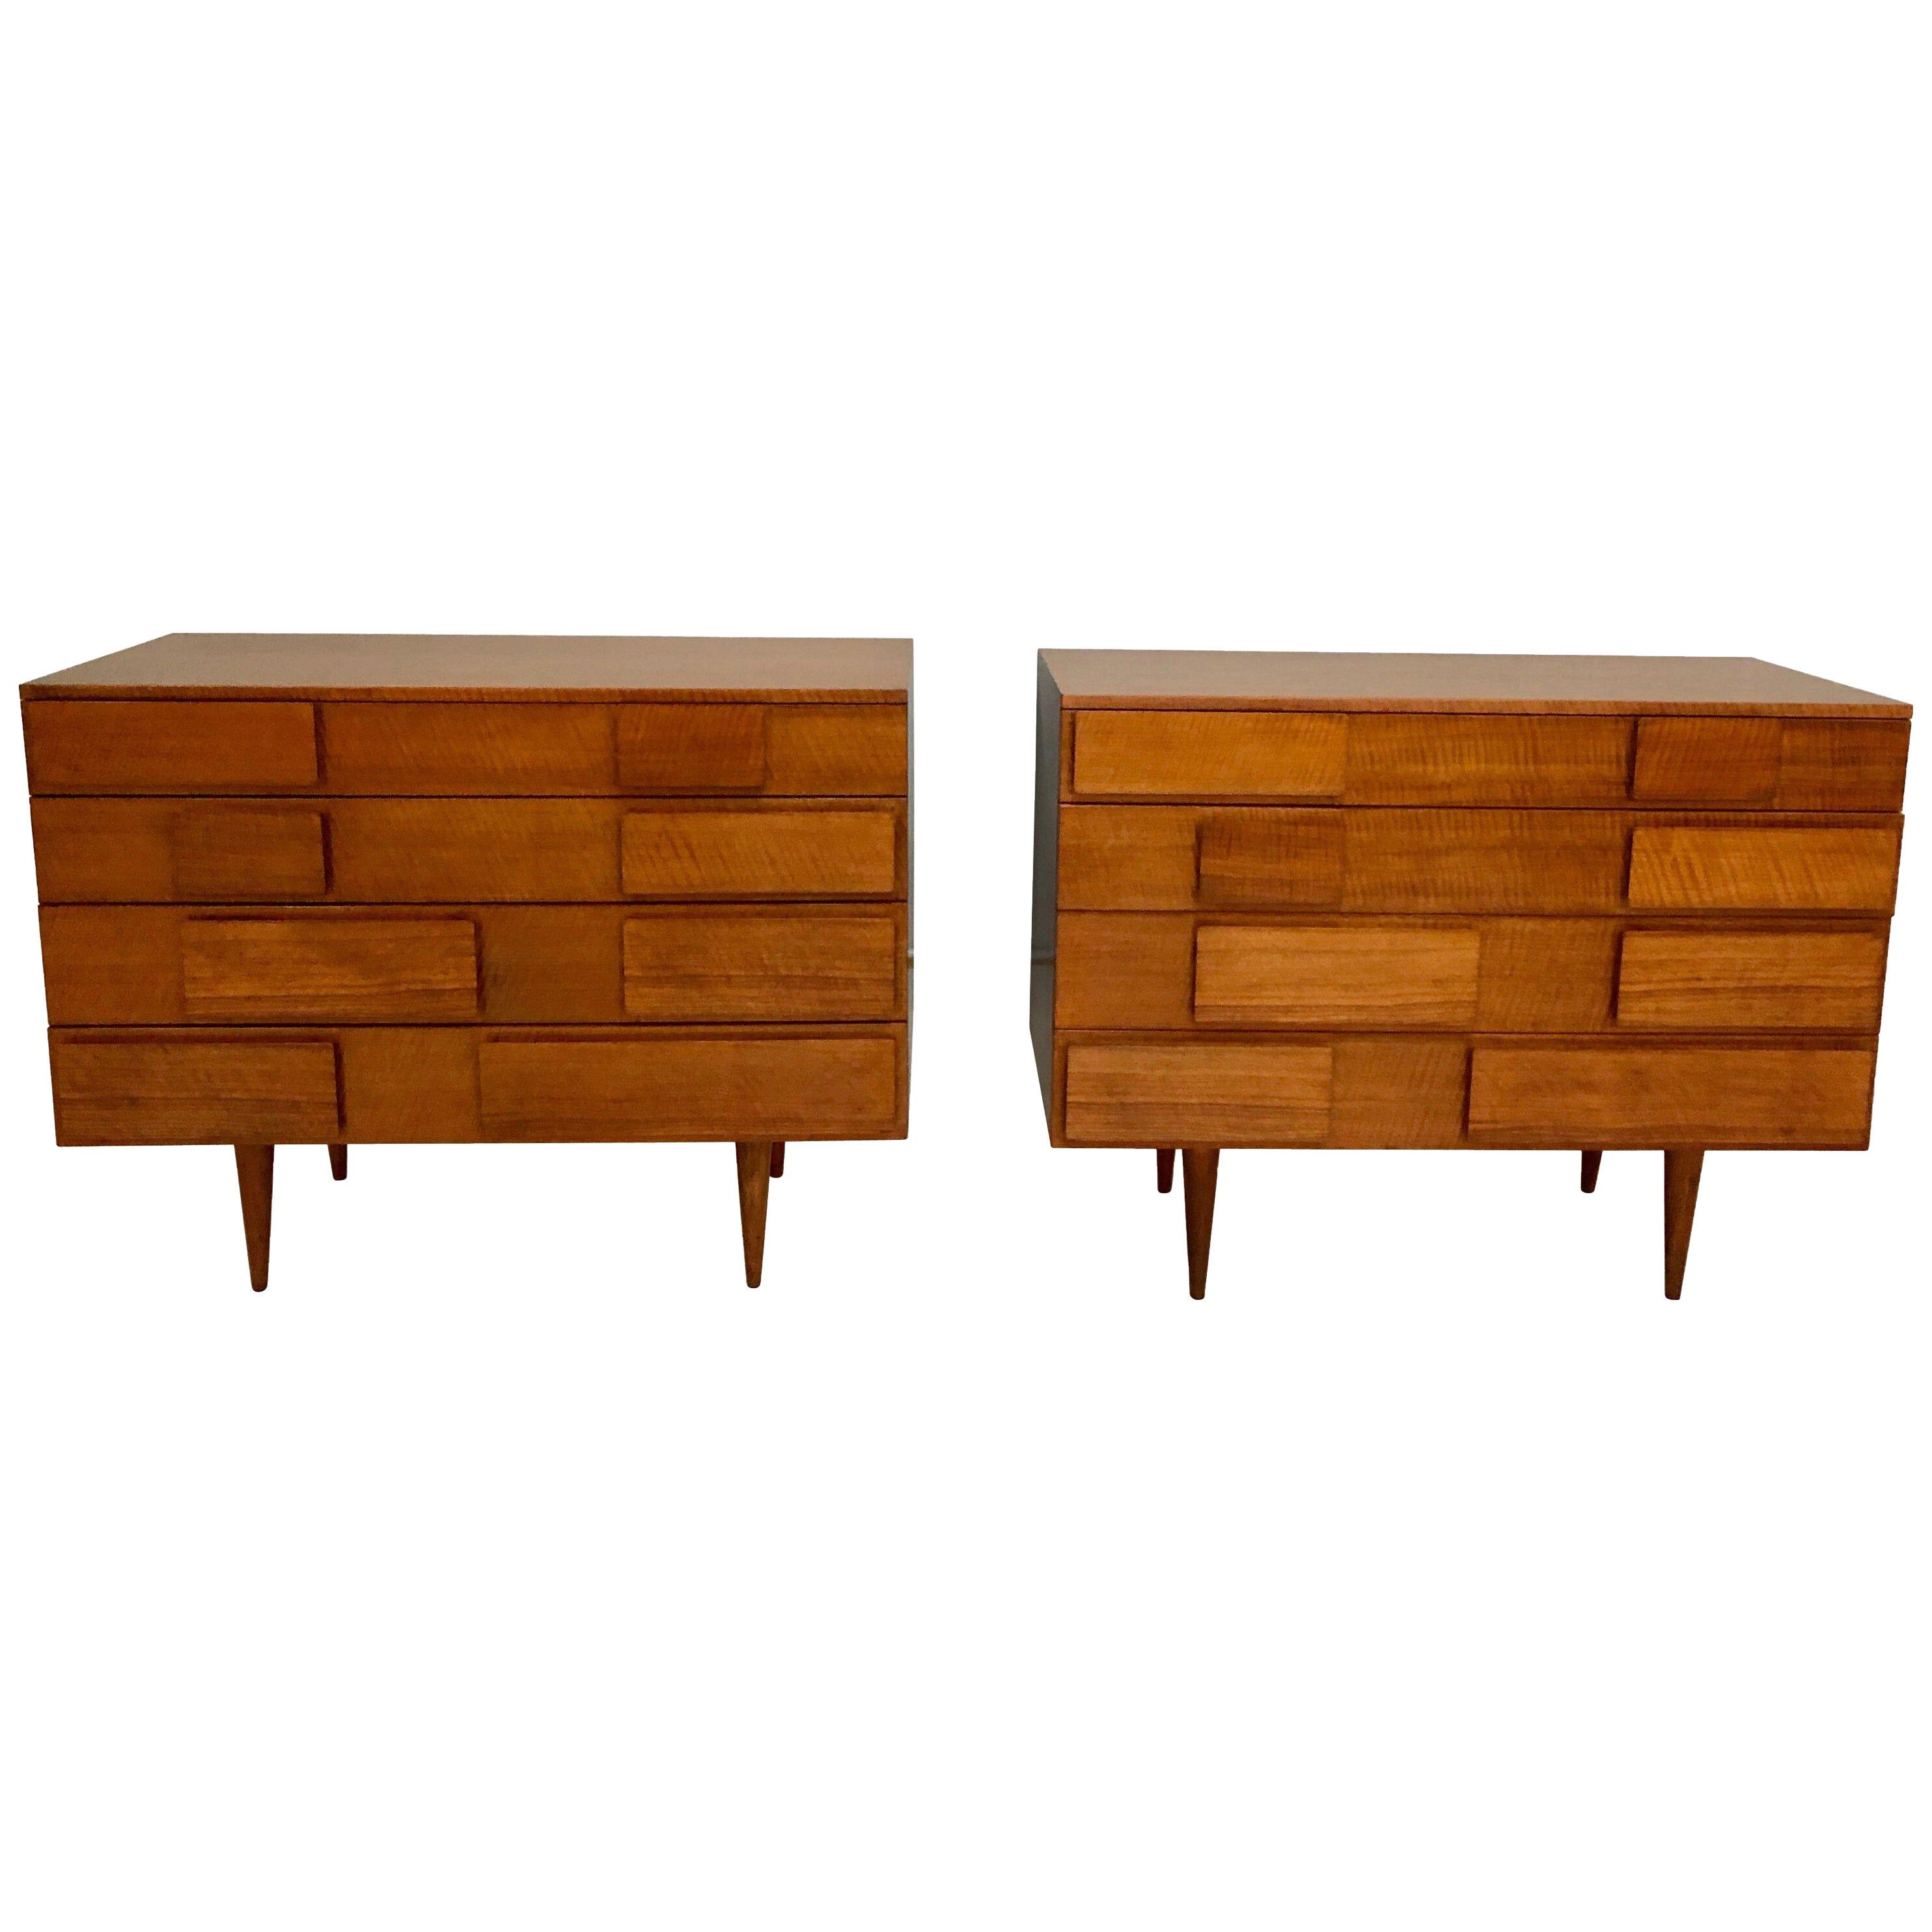 Pair of Gio Ponti Chests for Singer & Sons, Model 2129, circa 1955